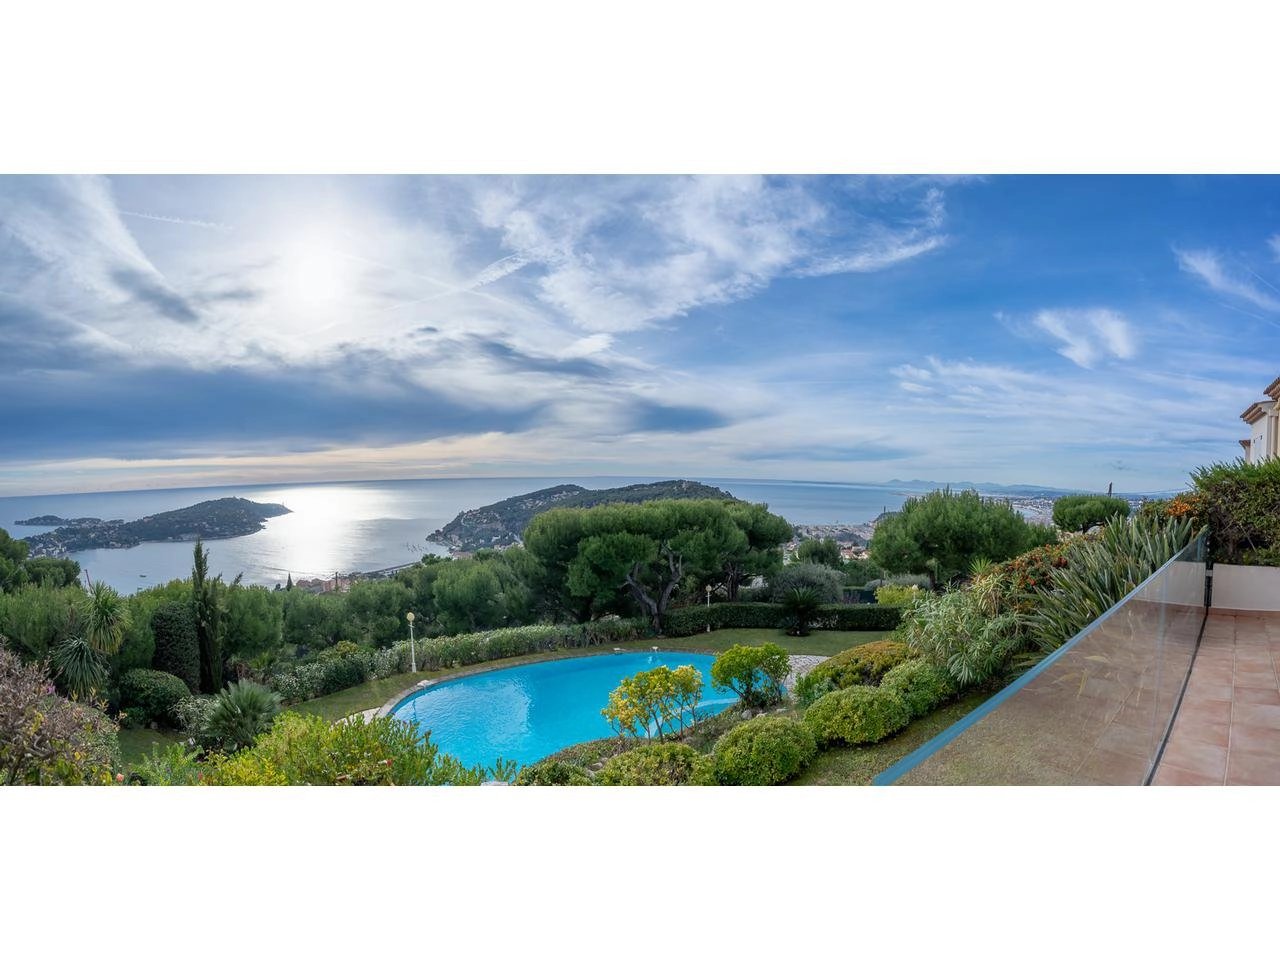 Apartment with views over Villefranche sur Mer